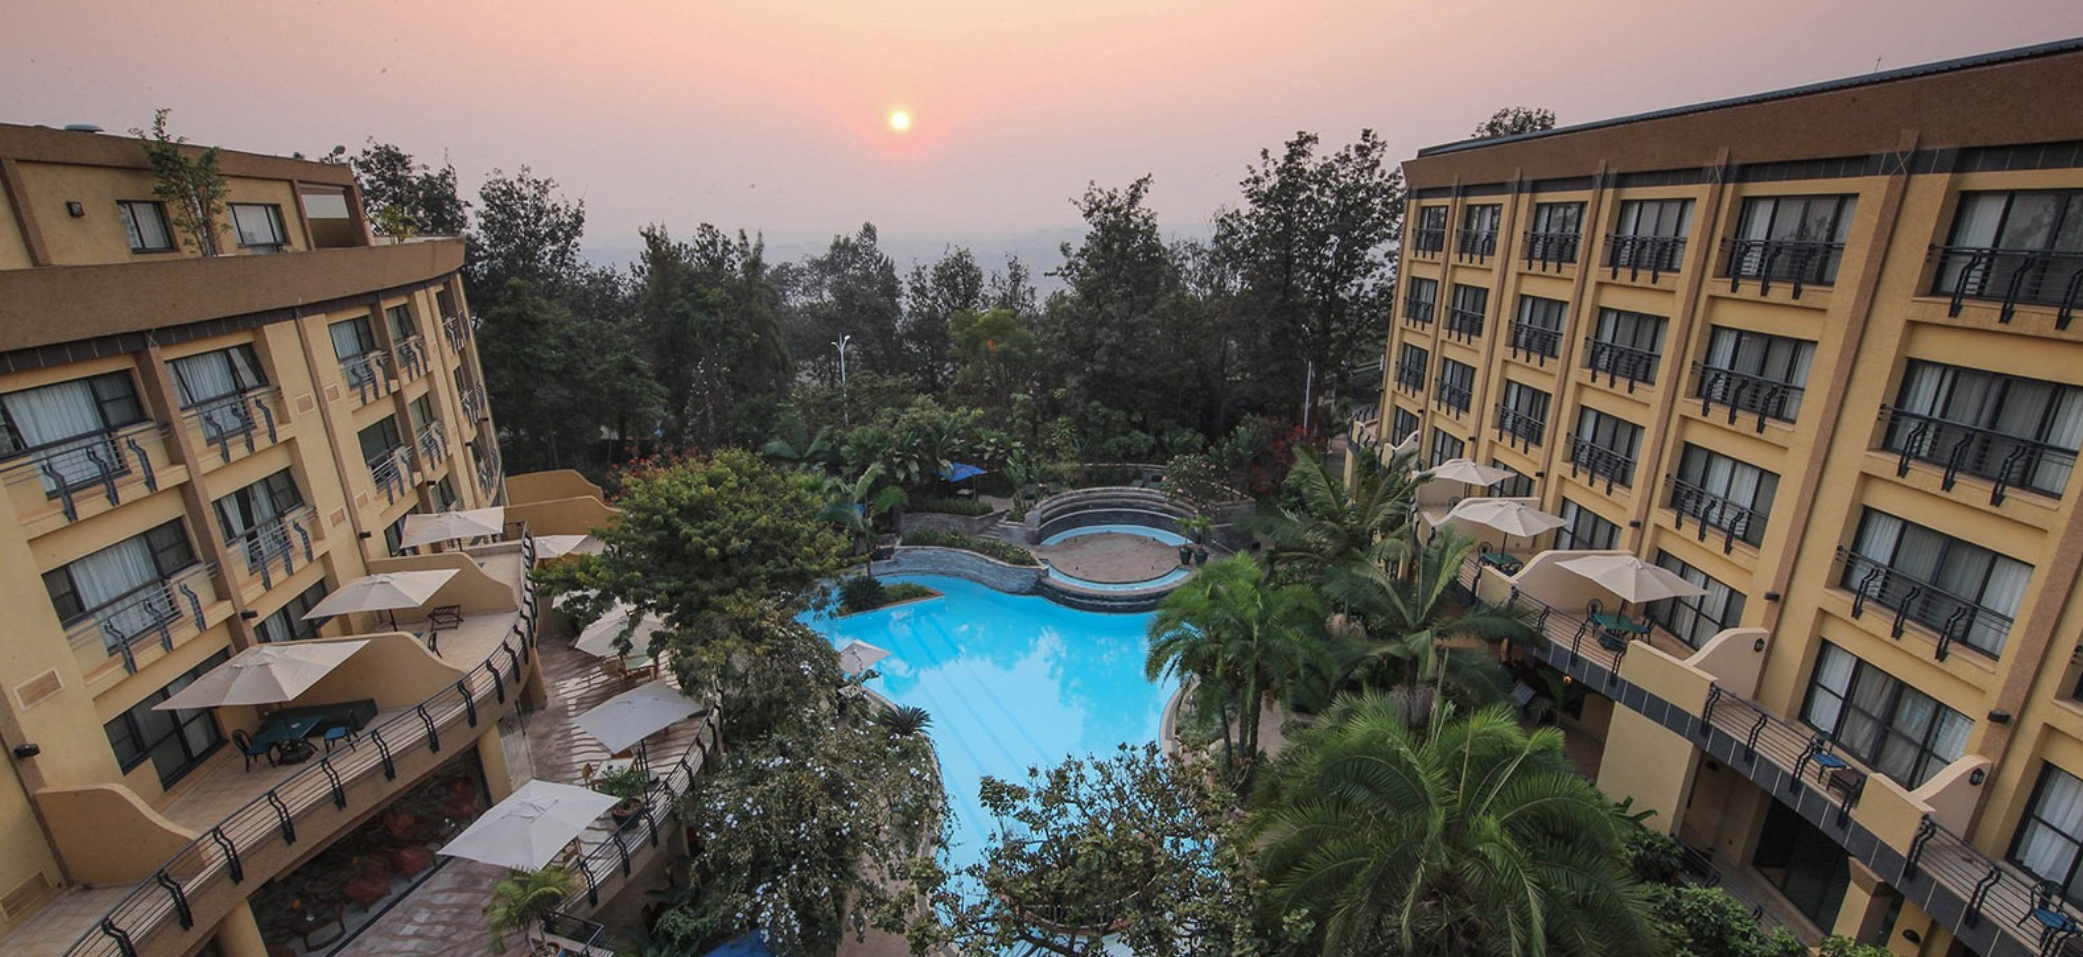 Kigali Serena Hotel rear exterior courtyard with outdoor pool pictured at sunset